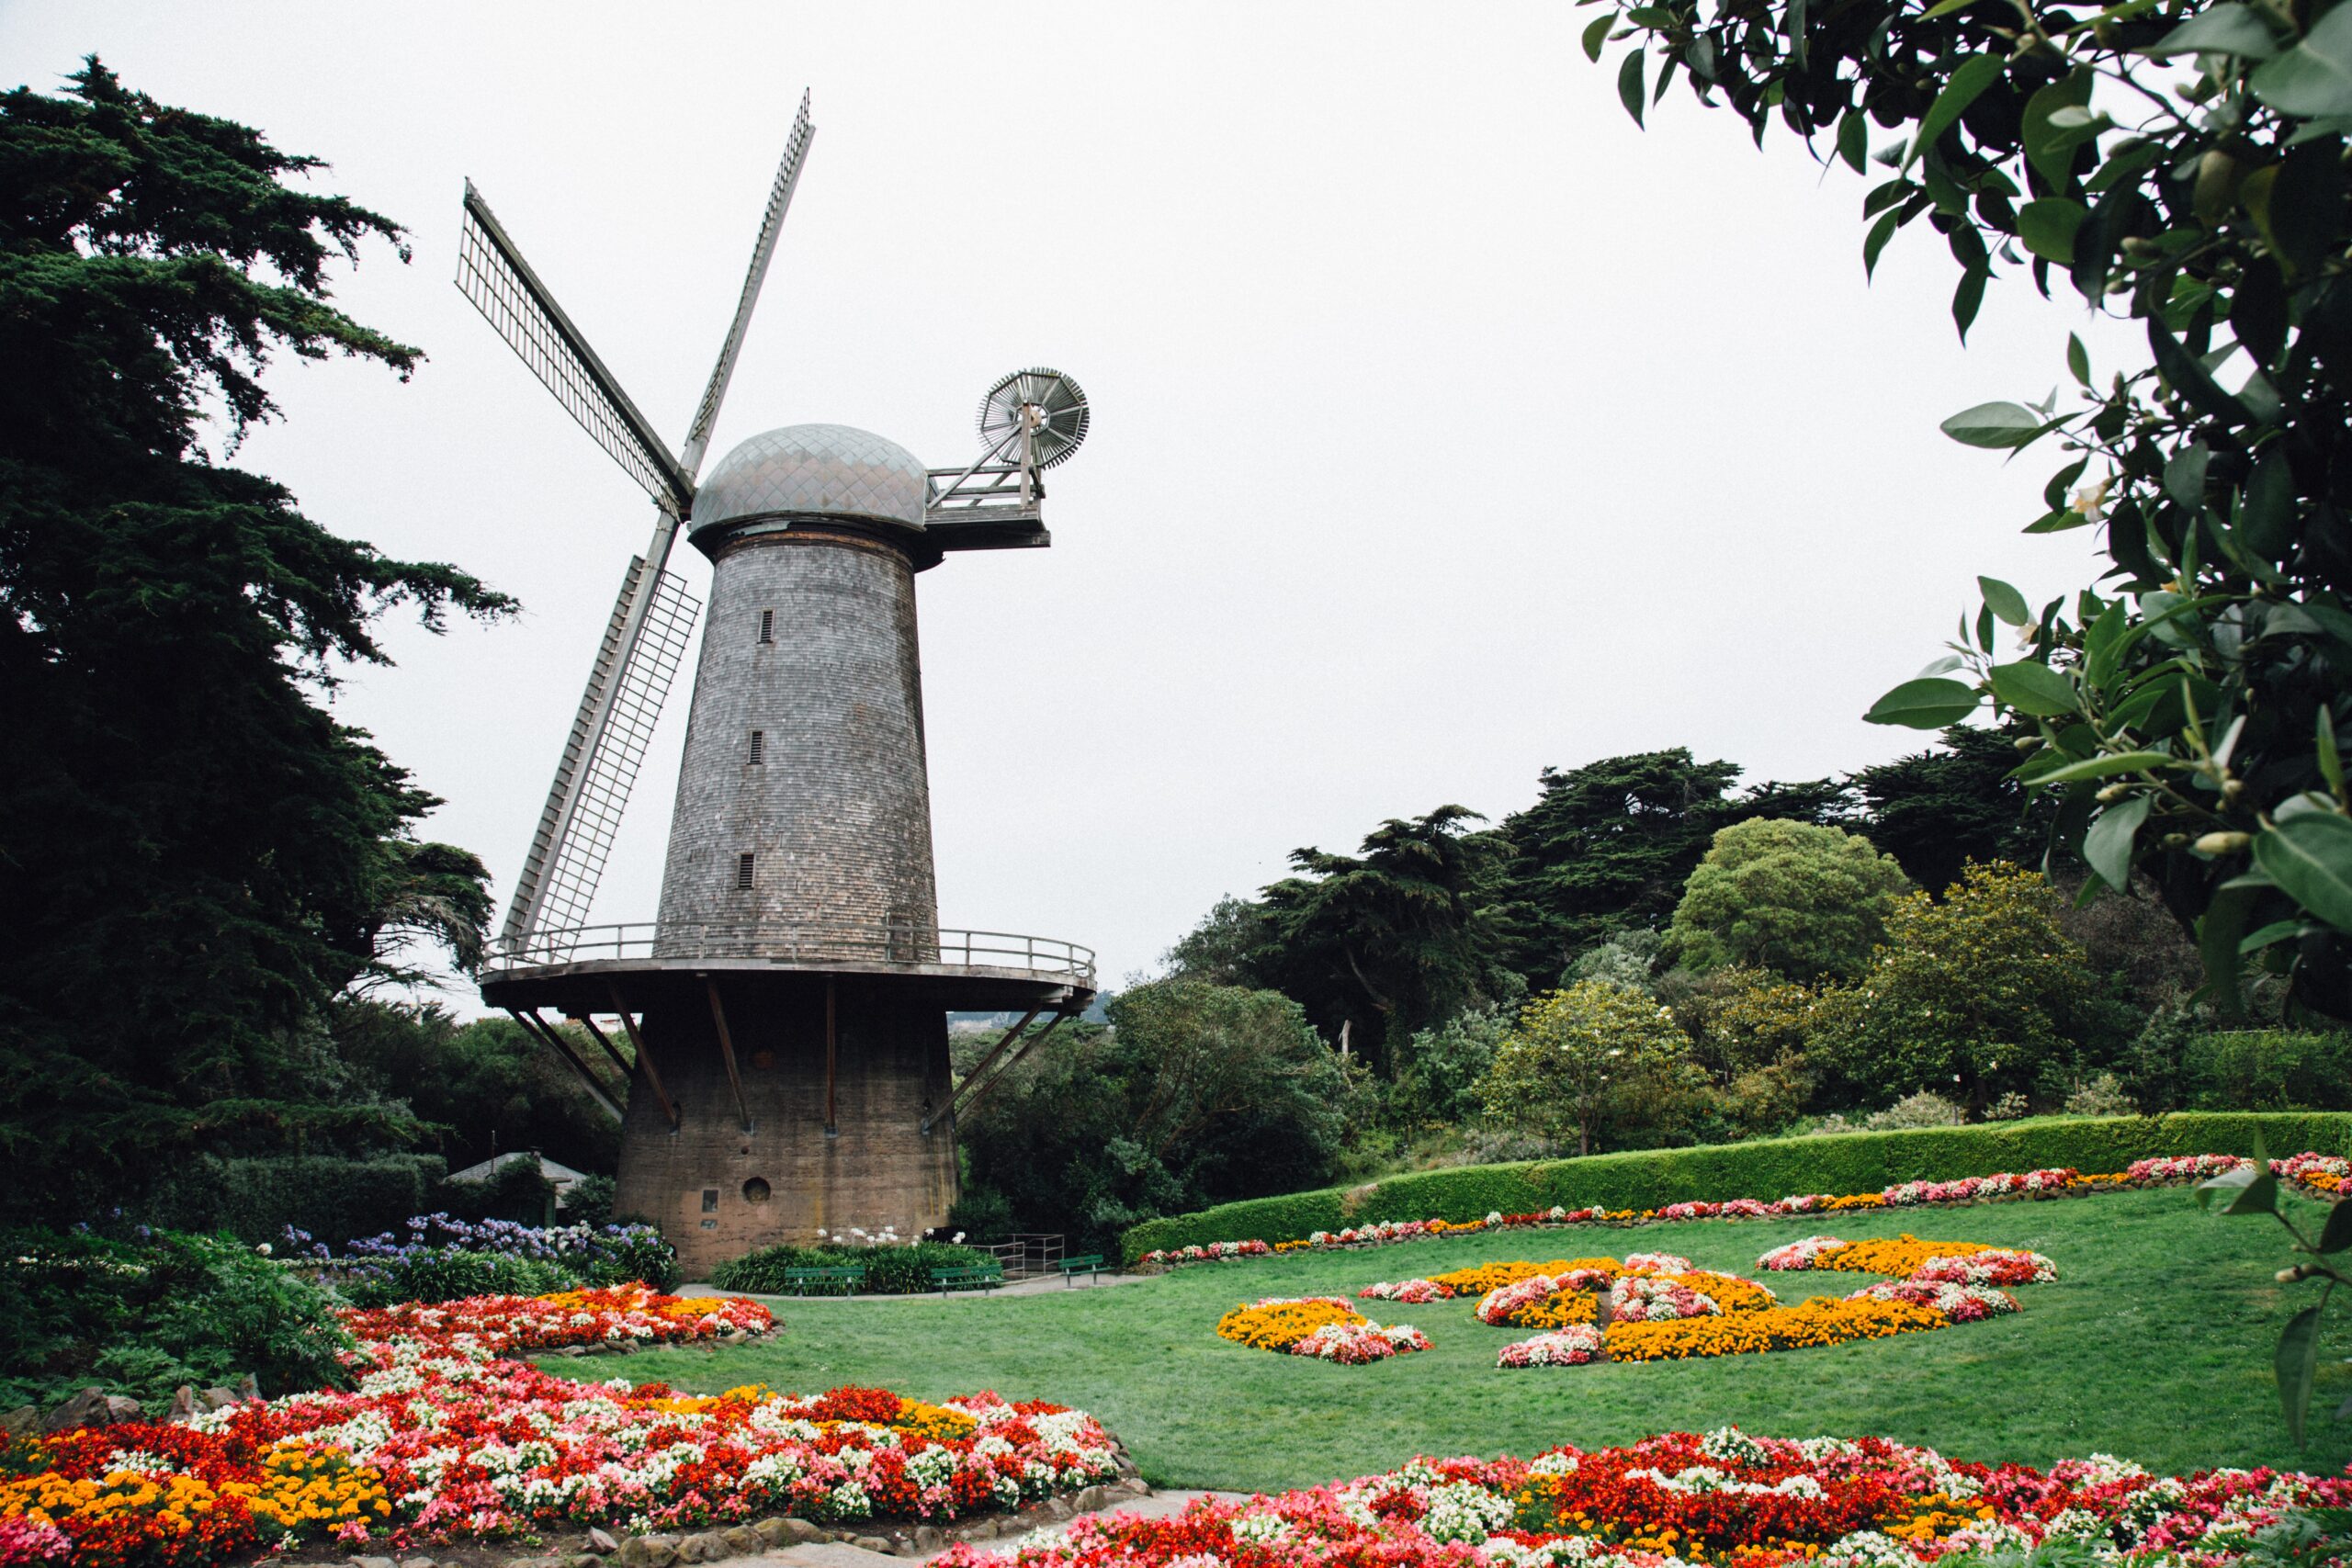 View of the Dutch Windmill in Golden Gate Park, San Francisco